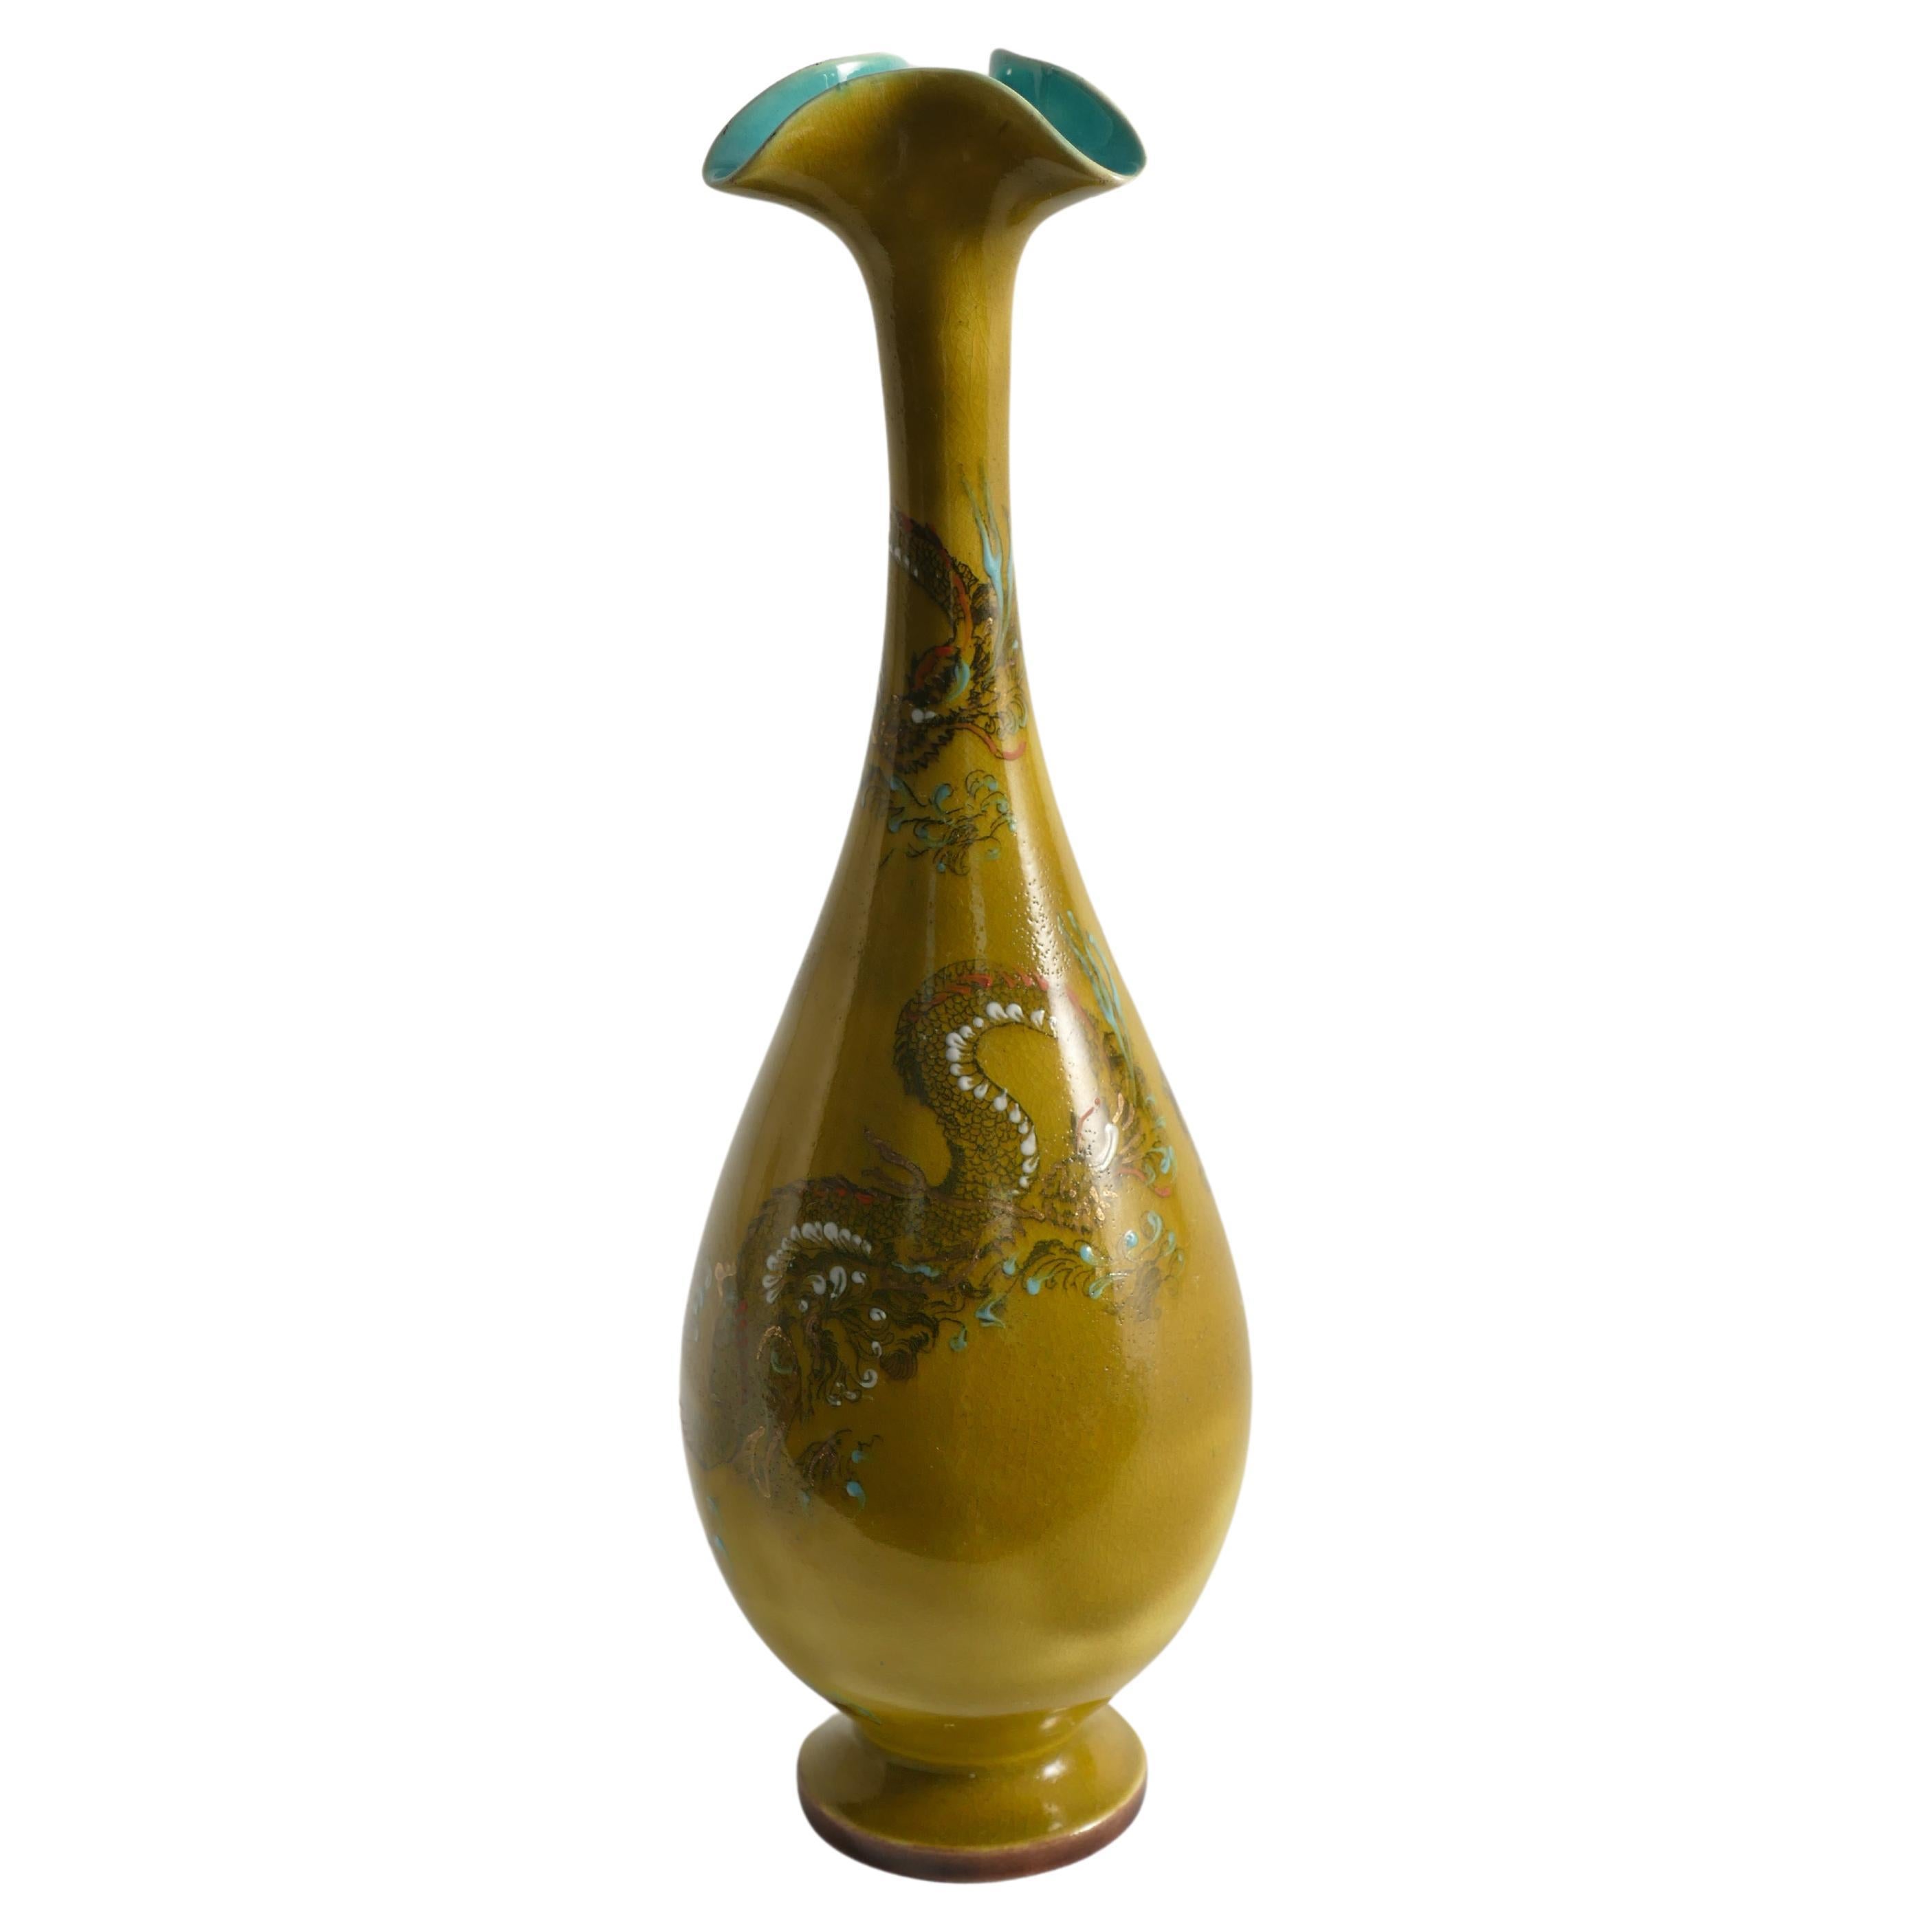 Elegantly adorned with intricate chinoiserie dragon detailing, this ceramic ochre yellow vase from Lambeth Doulton Faience exudes timeless charm and exquisite craftsmanship. Two meticulously painted dragons grace the surface, each scale meticulously